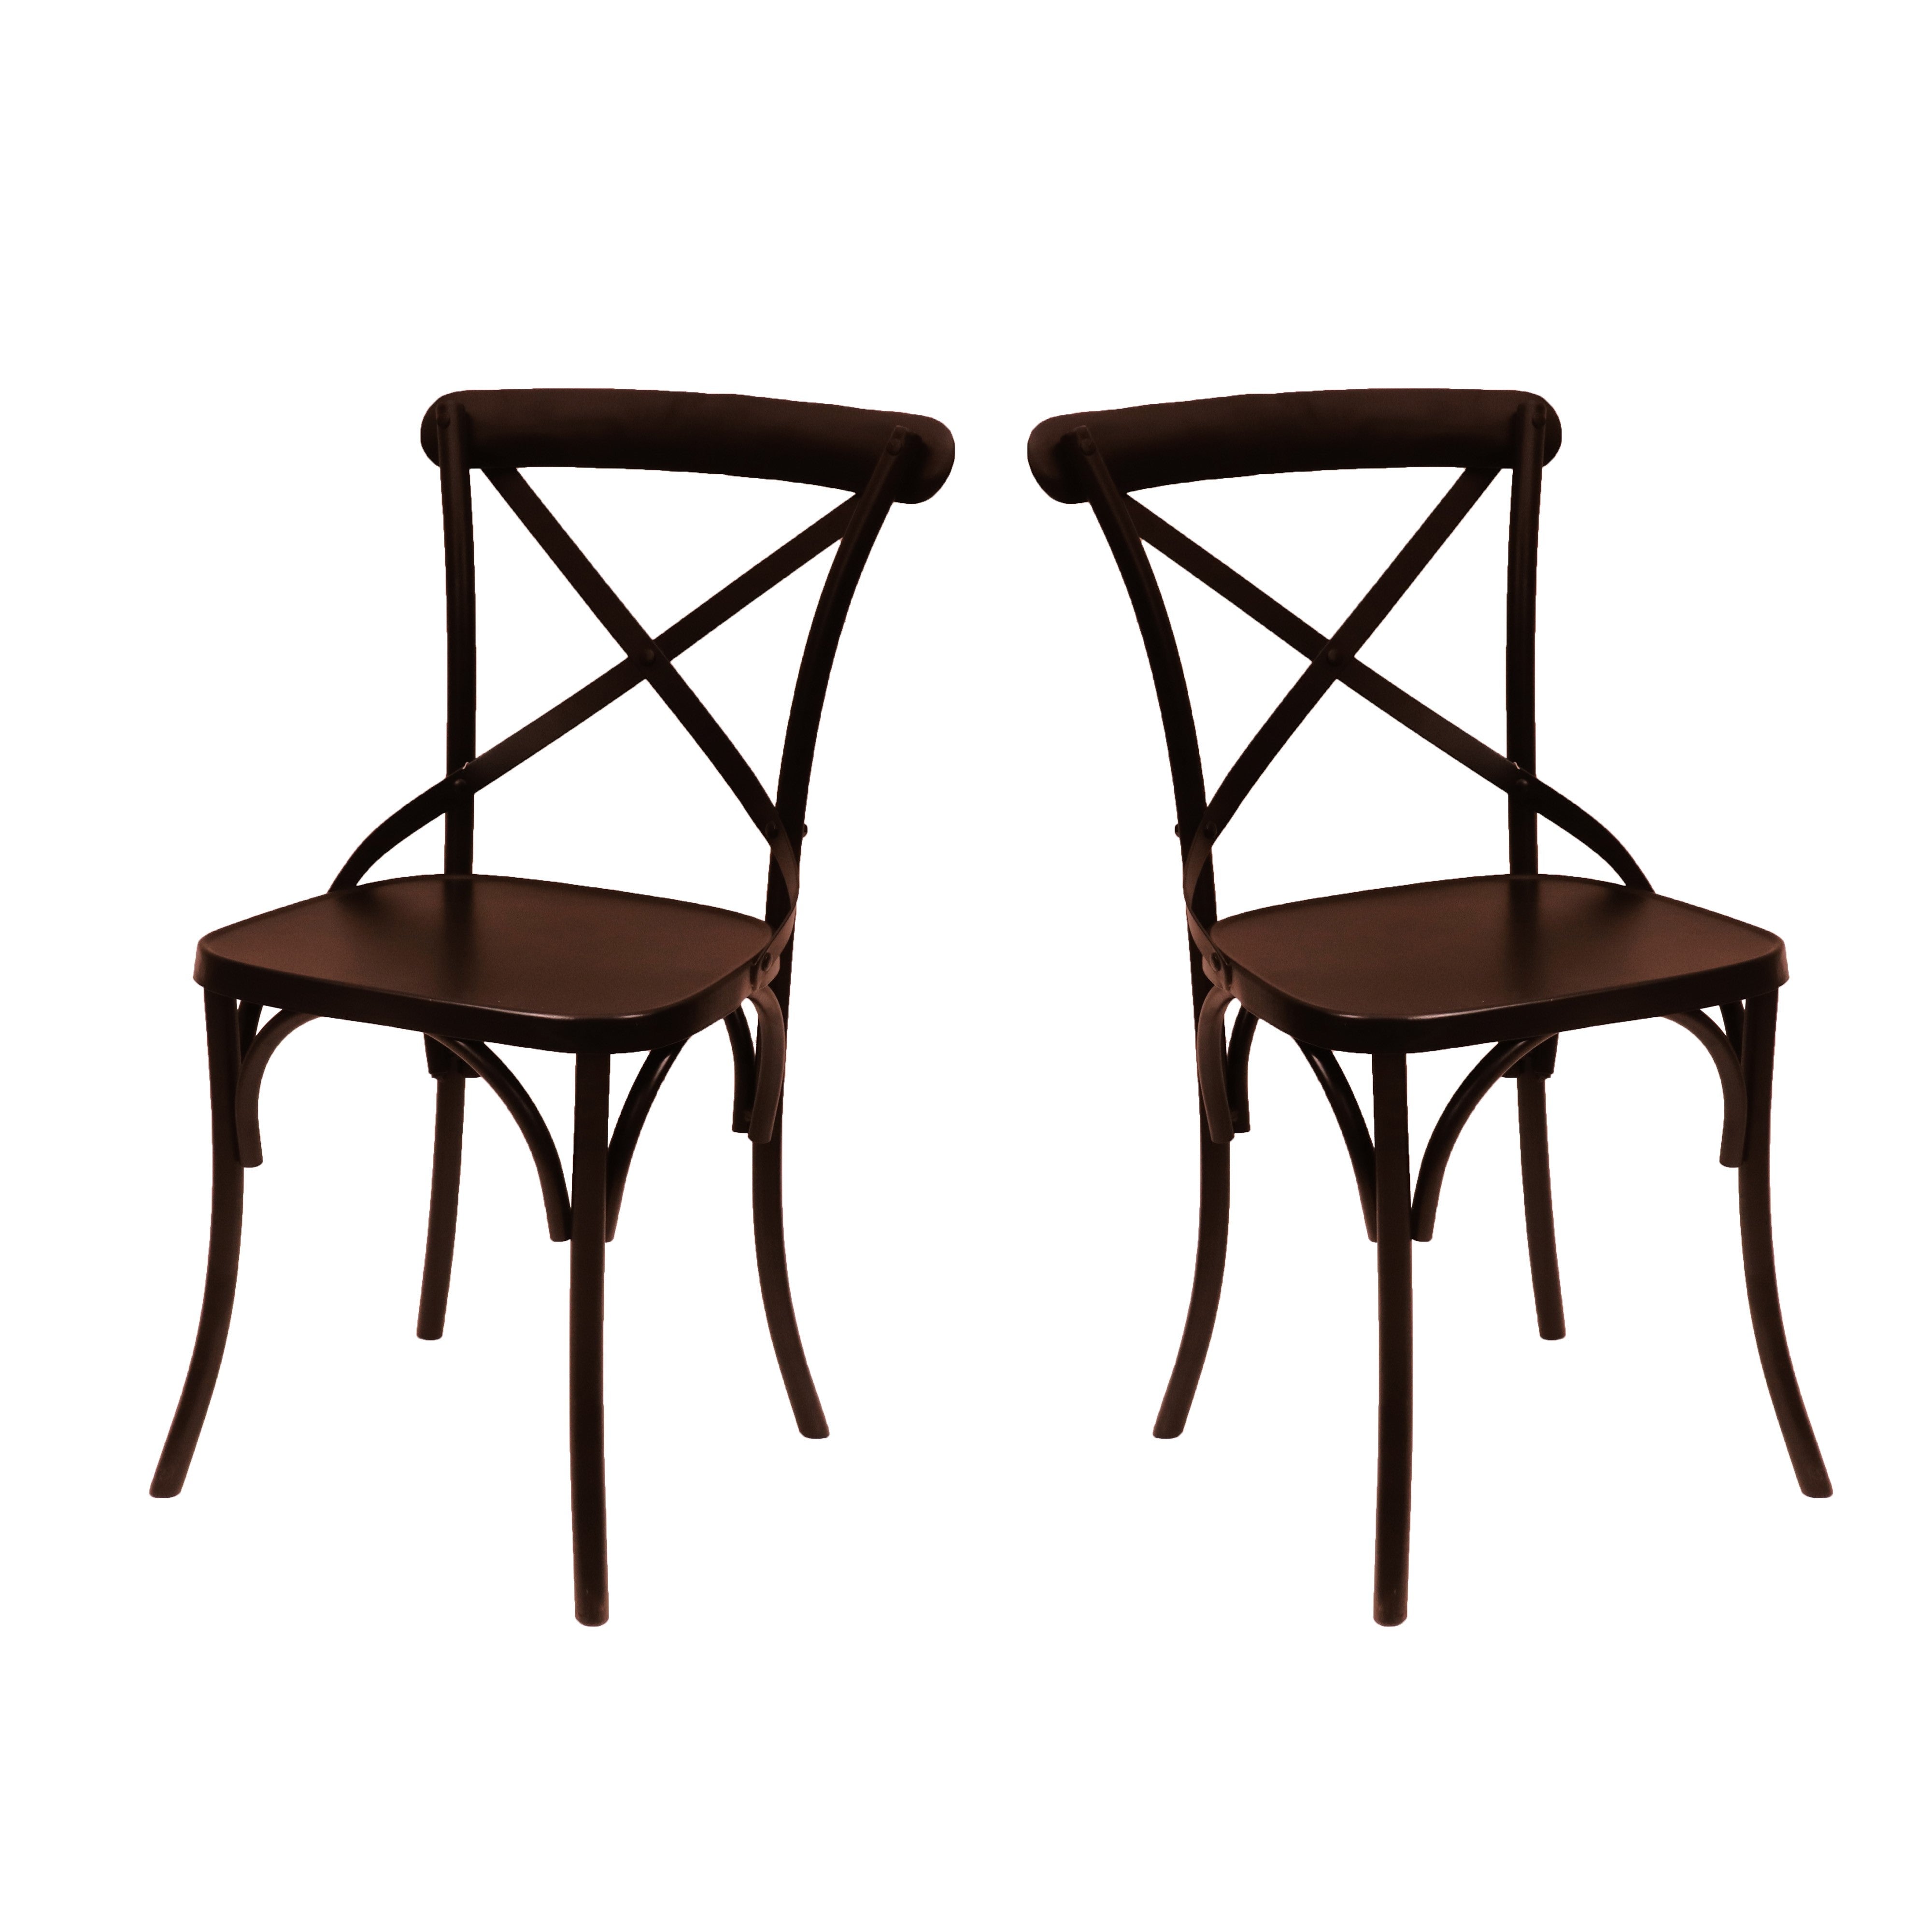 (Set of 2) Black Metal Exotic Hue Chair Dining Chair